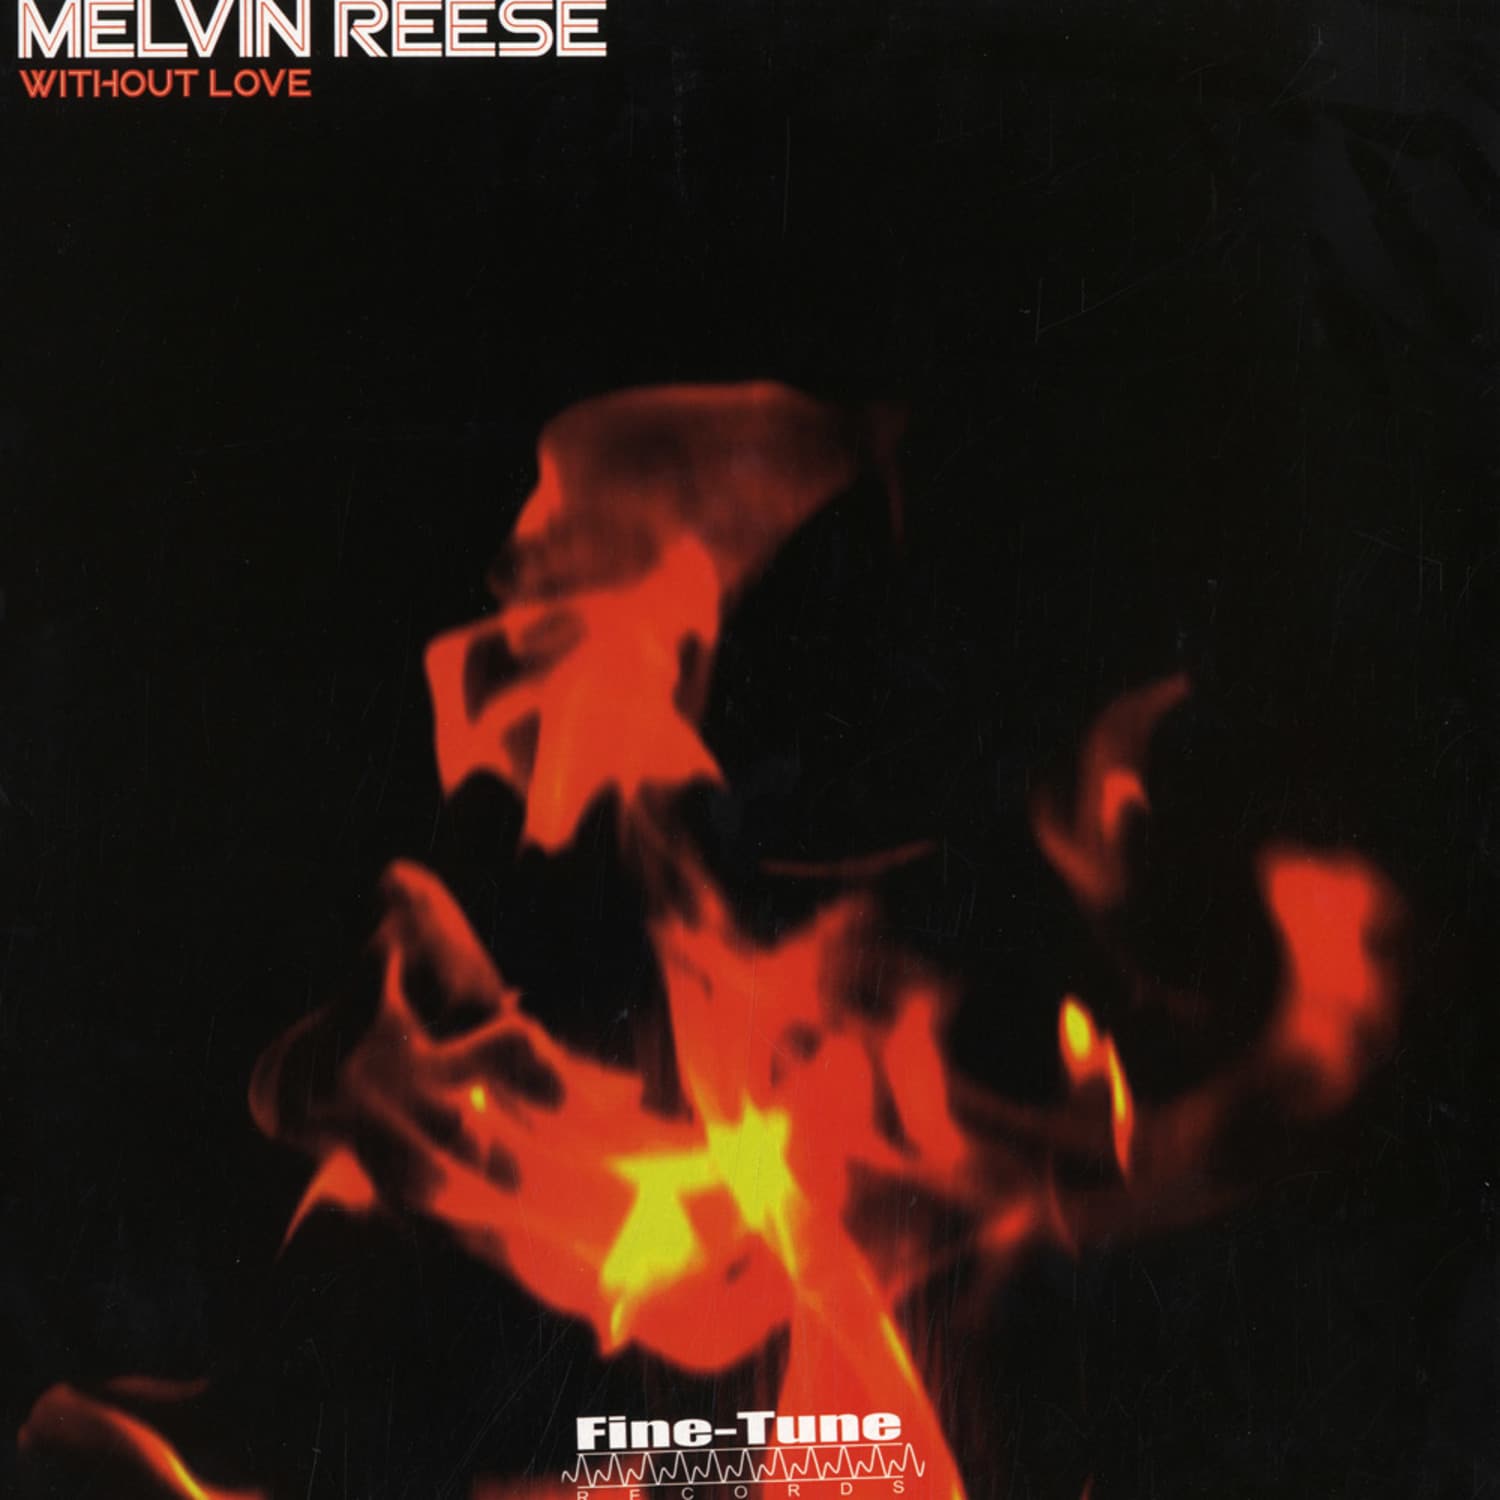 Melvin Reese - WITHOUT LOVE